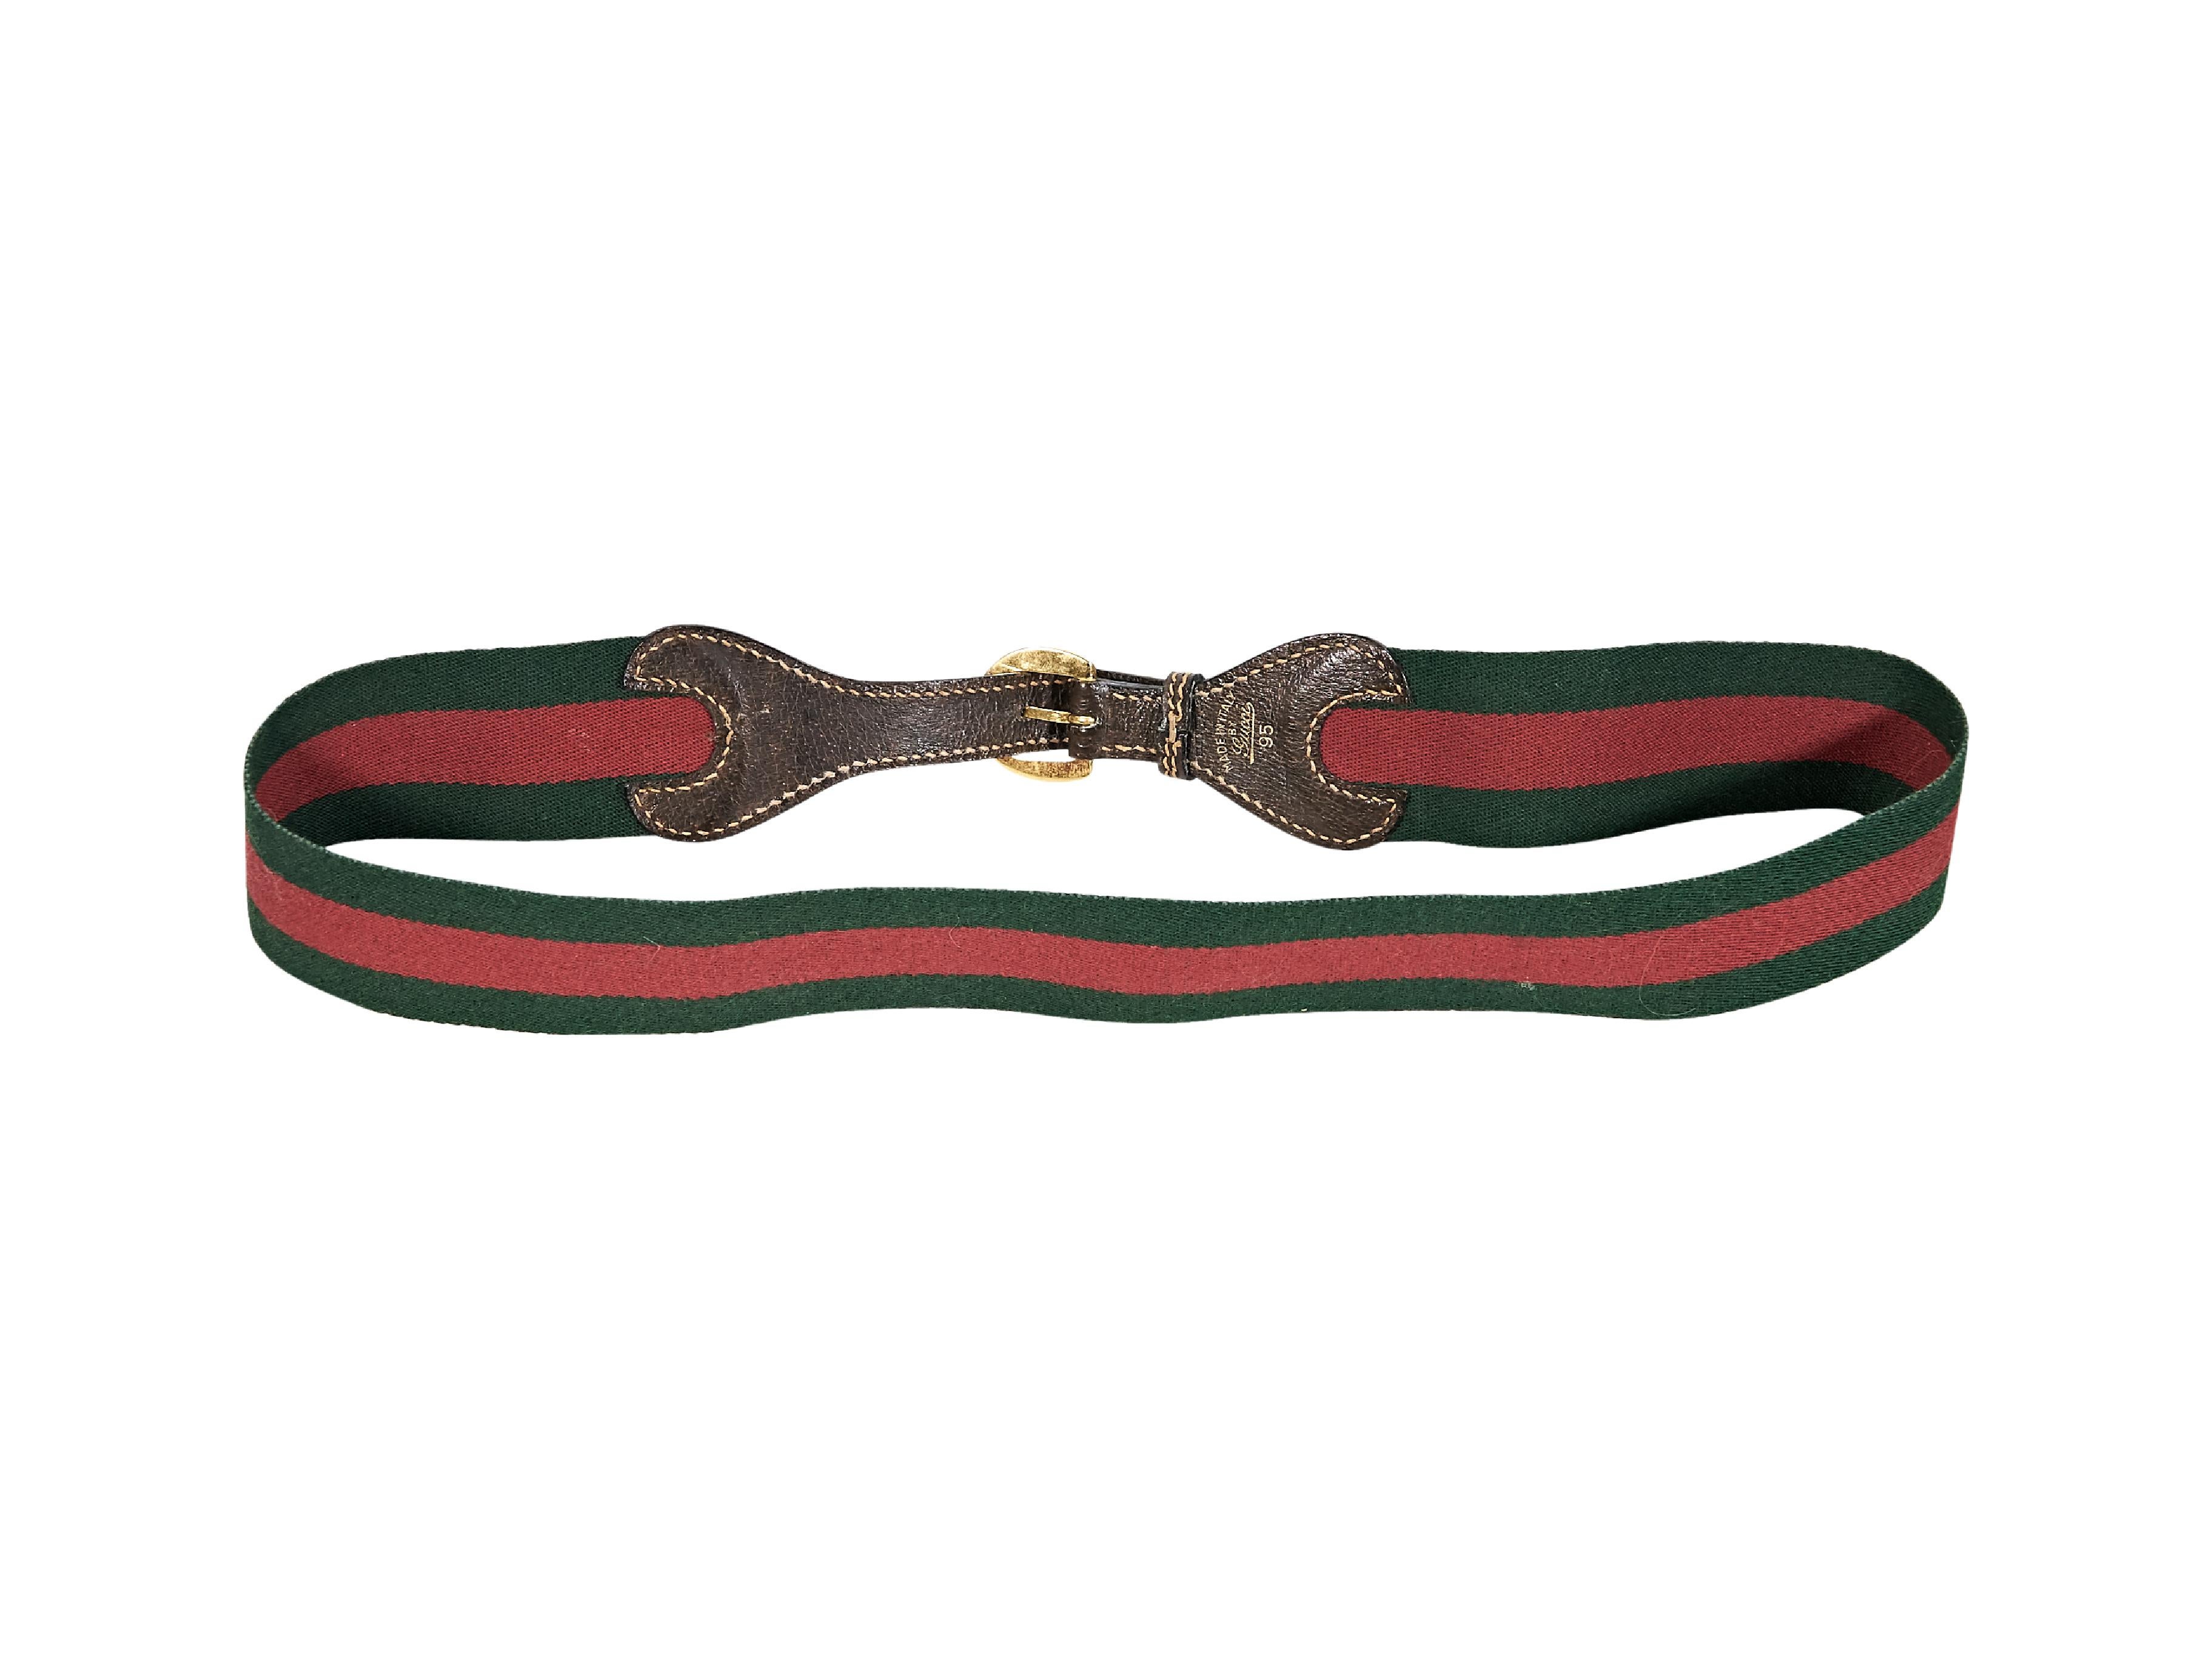 Product details:  Vintage red and green striped canvas belt by Gucci.  Trimmed with leather.  Adjustable buckle closure.  Goldtone hardware.  38-39